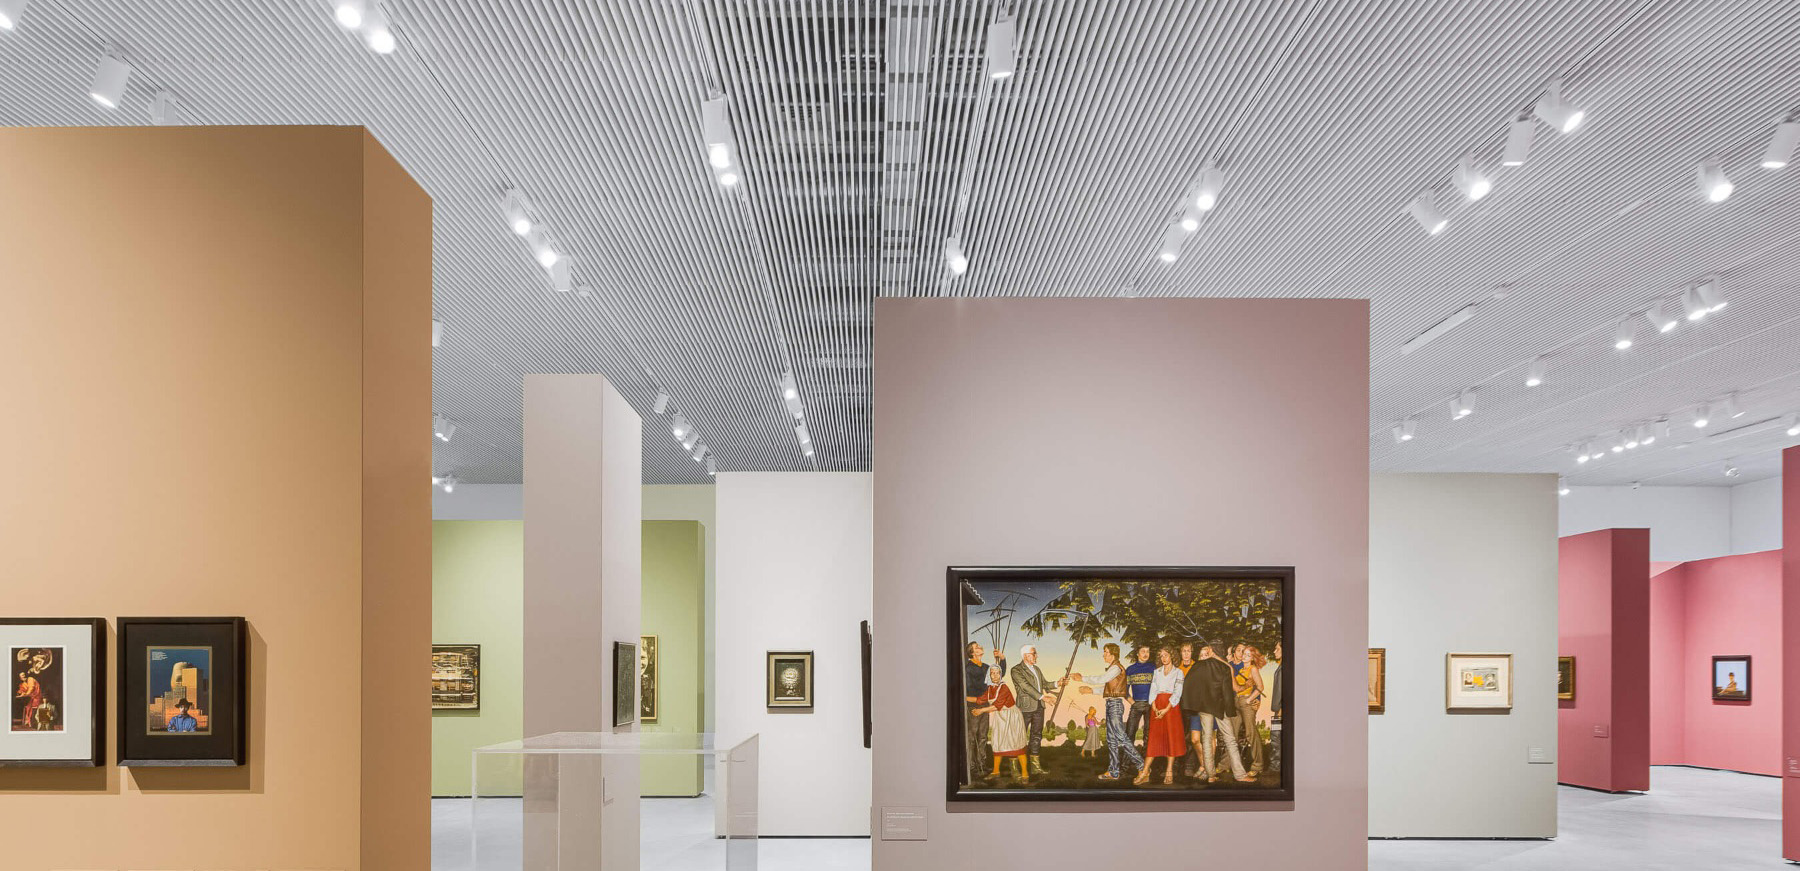 White cylinder LED track lights illuminate wall art in a gallery, mounted on a track channel recessed in a slatted wood ceiling.